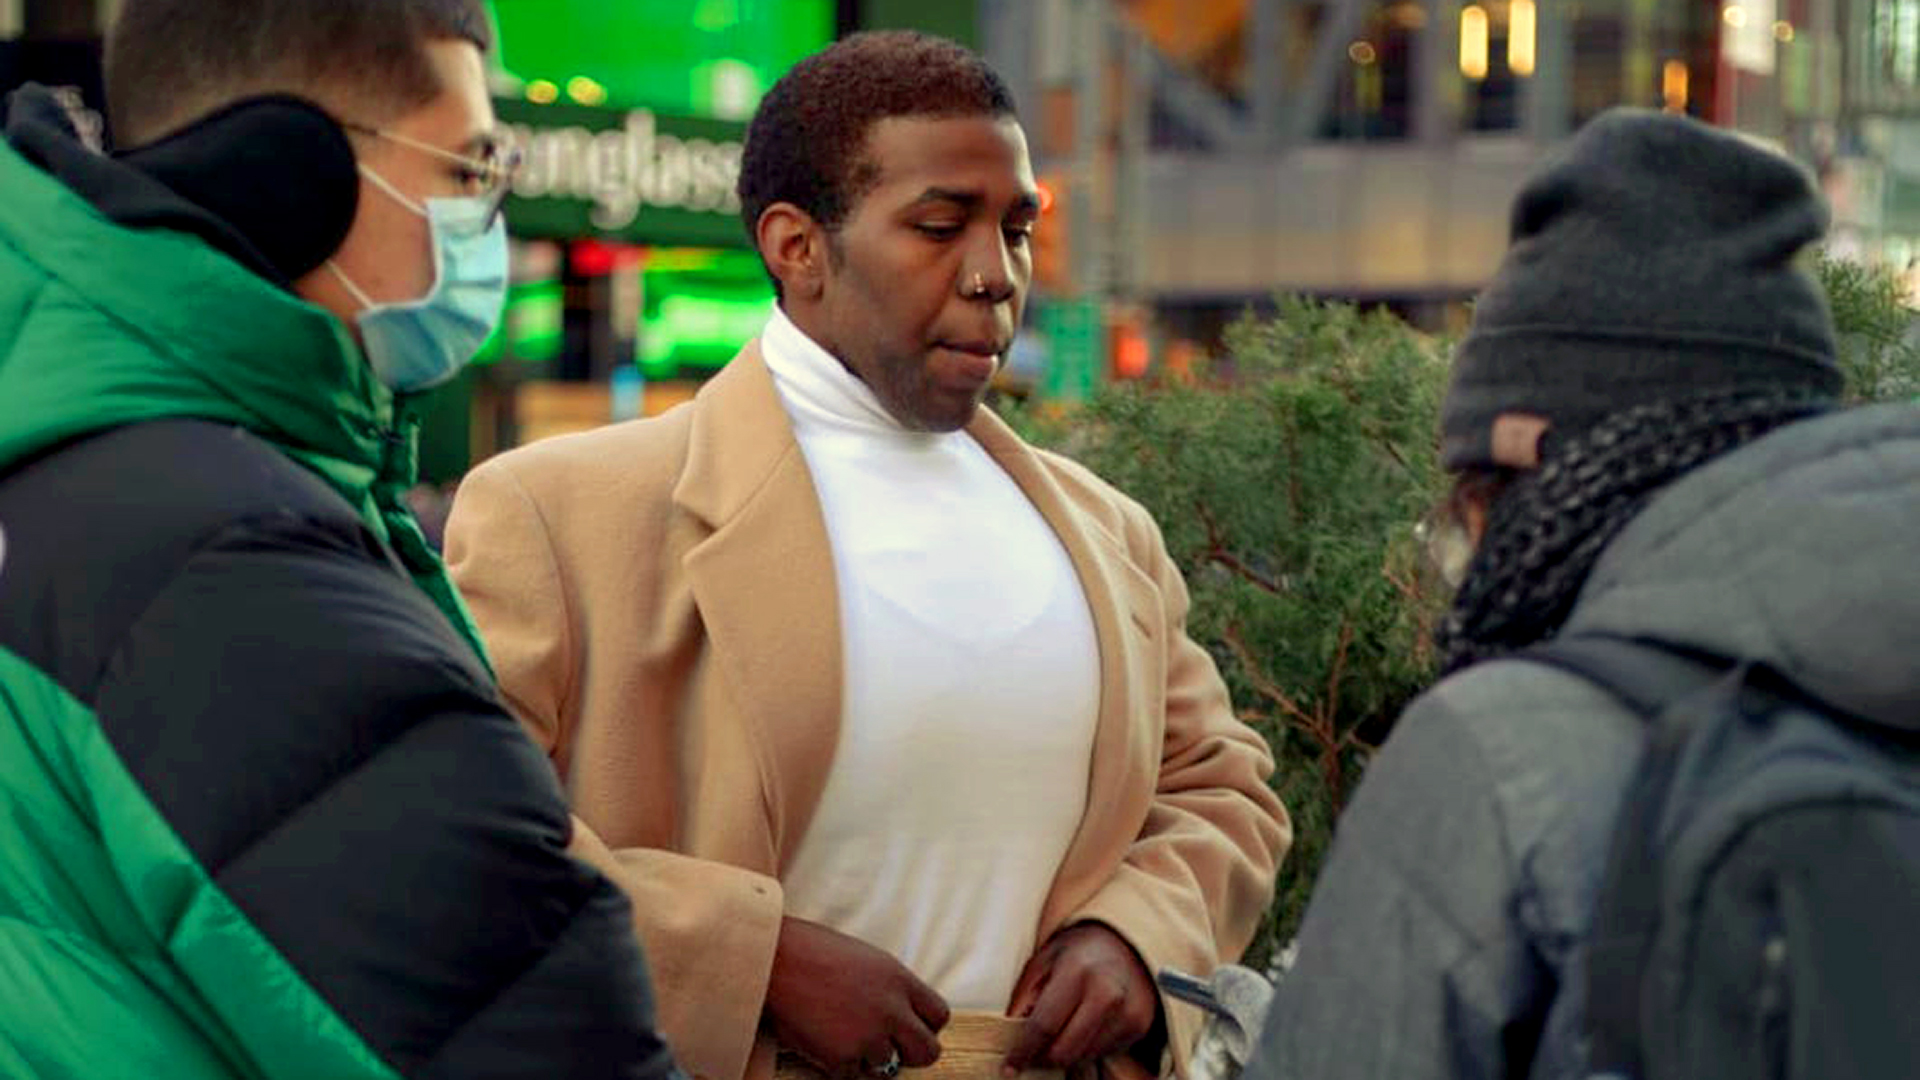 Young adults from Times Square Church stepped through fear to talk with those they encountered